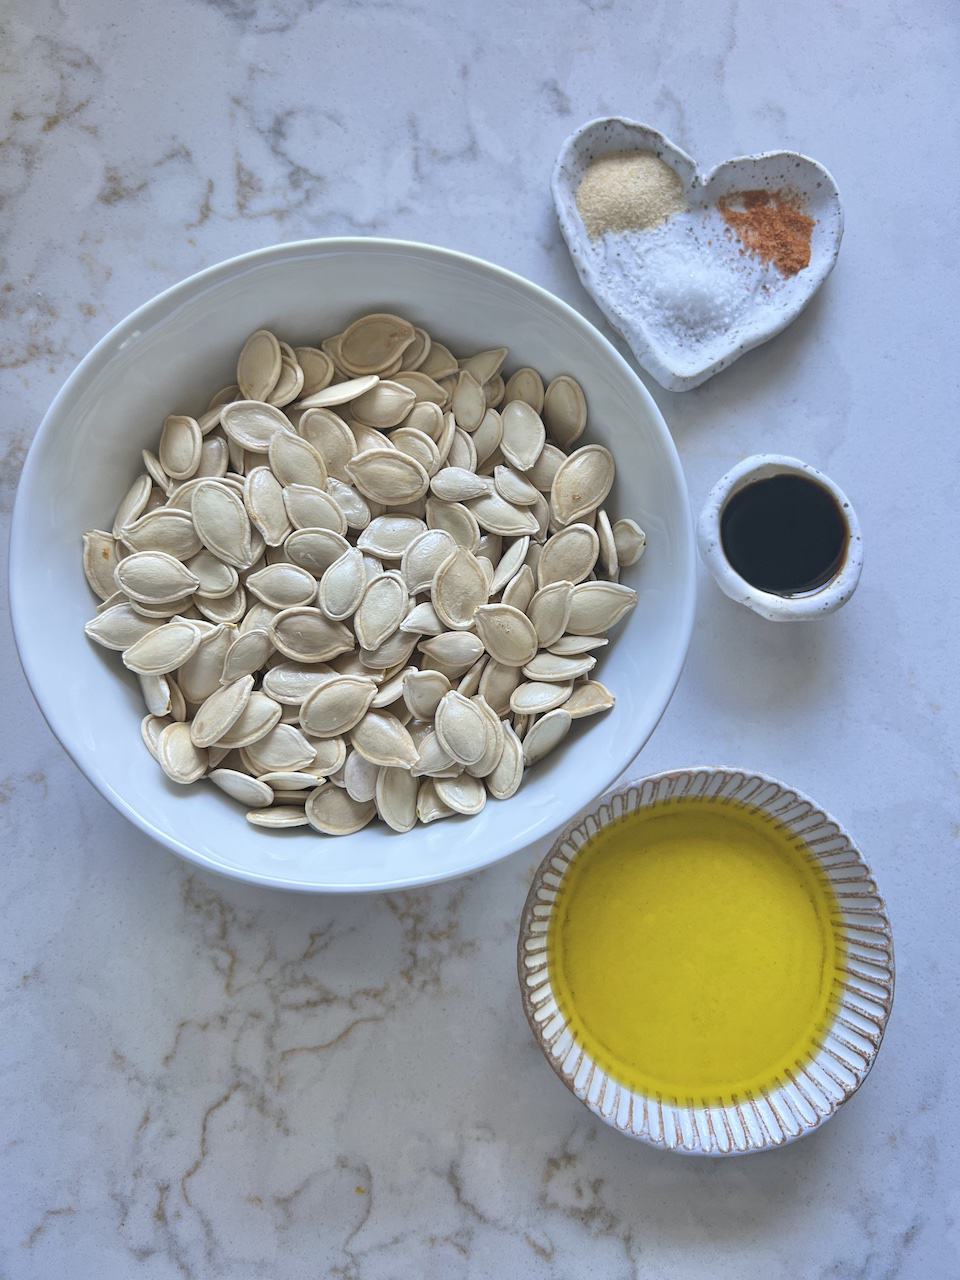 ingredients for roasted ،y pumpkin seeds measured out on a white surface